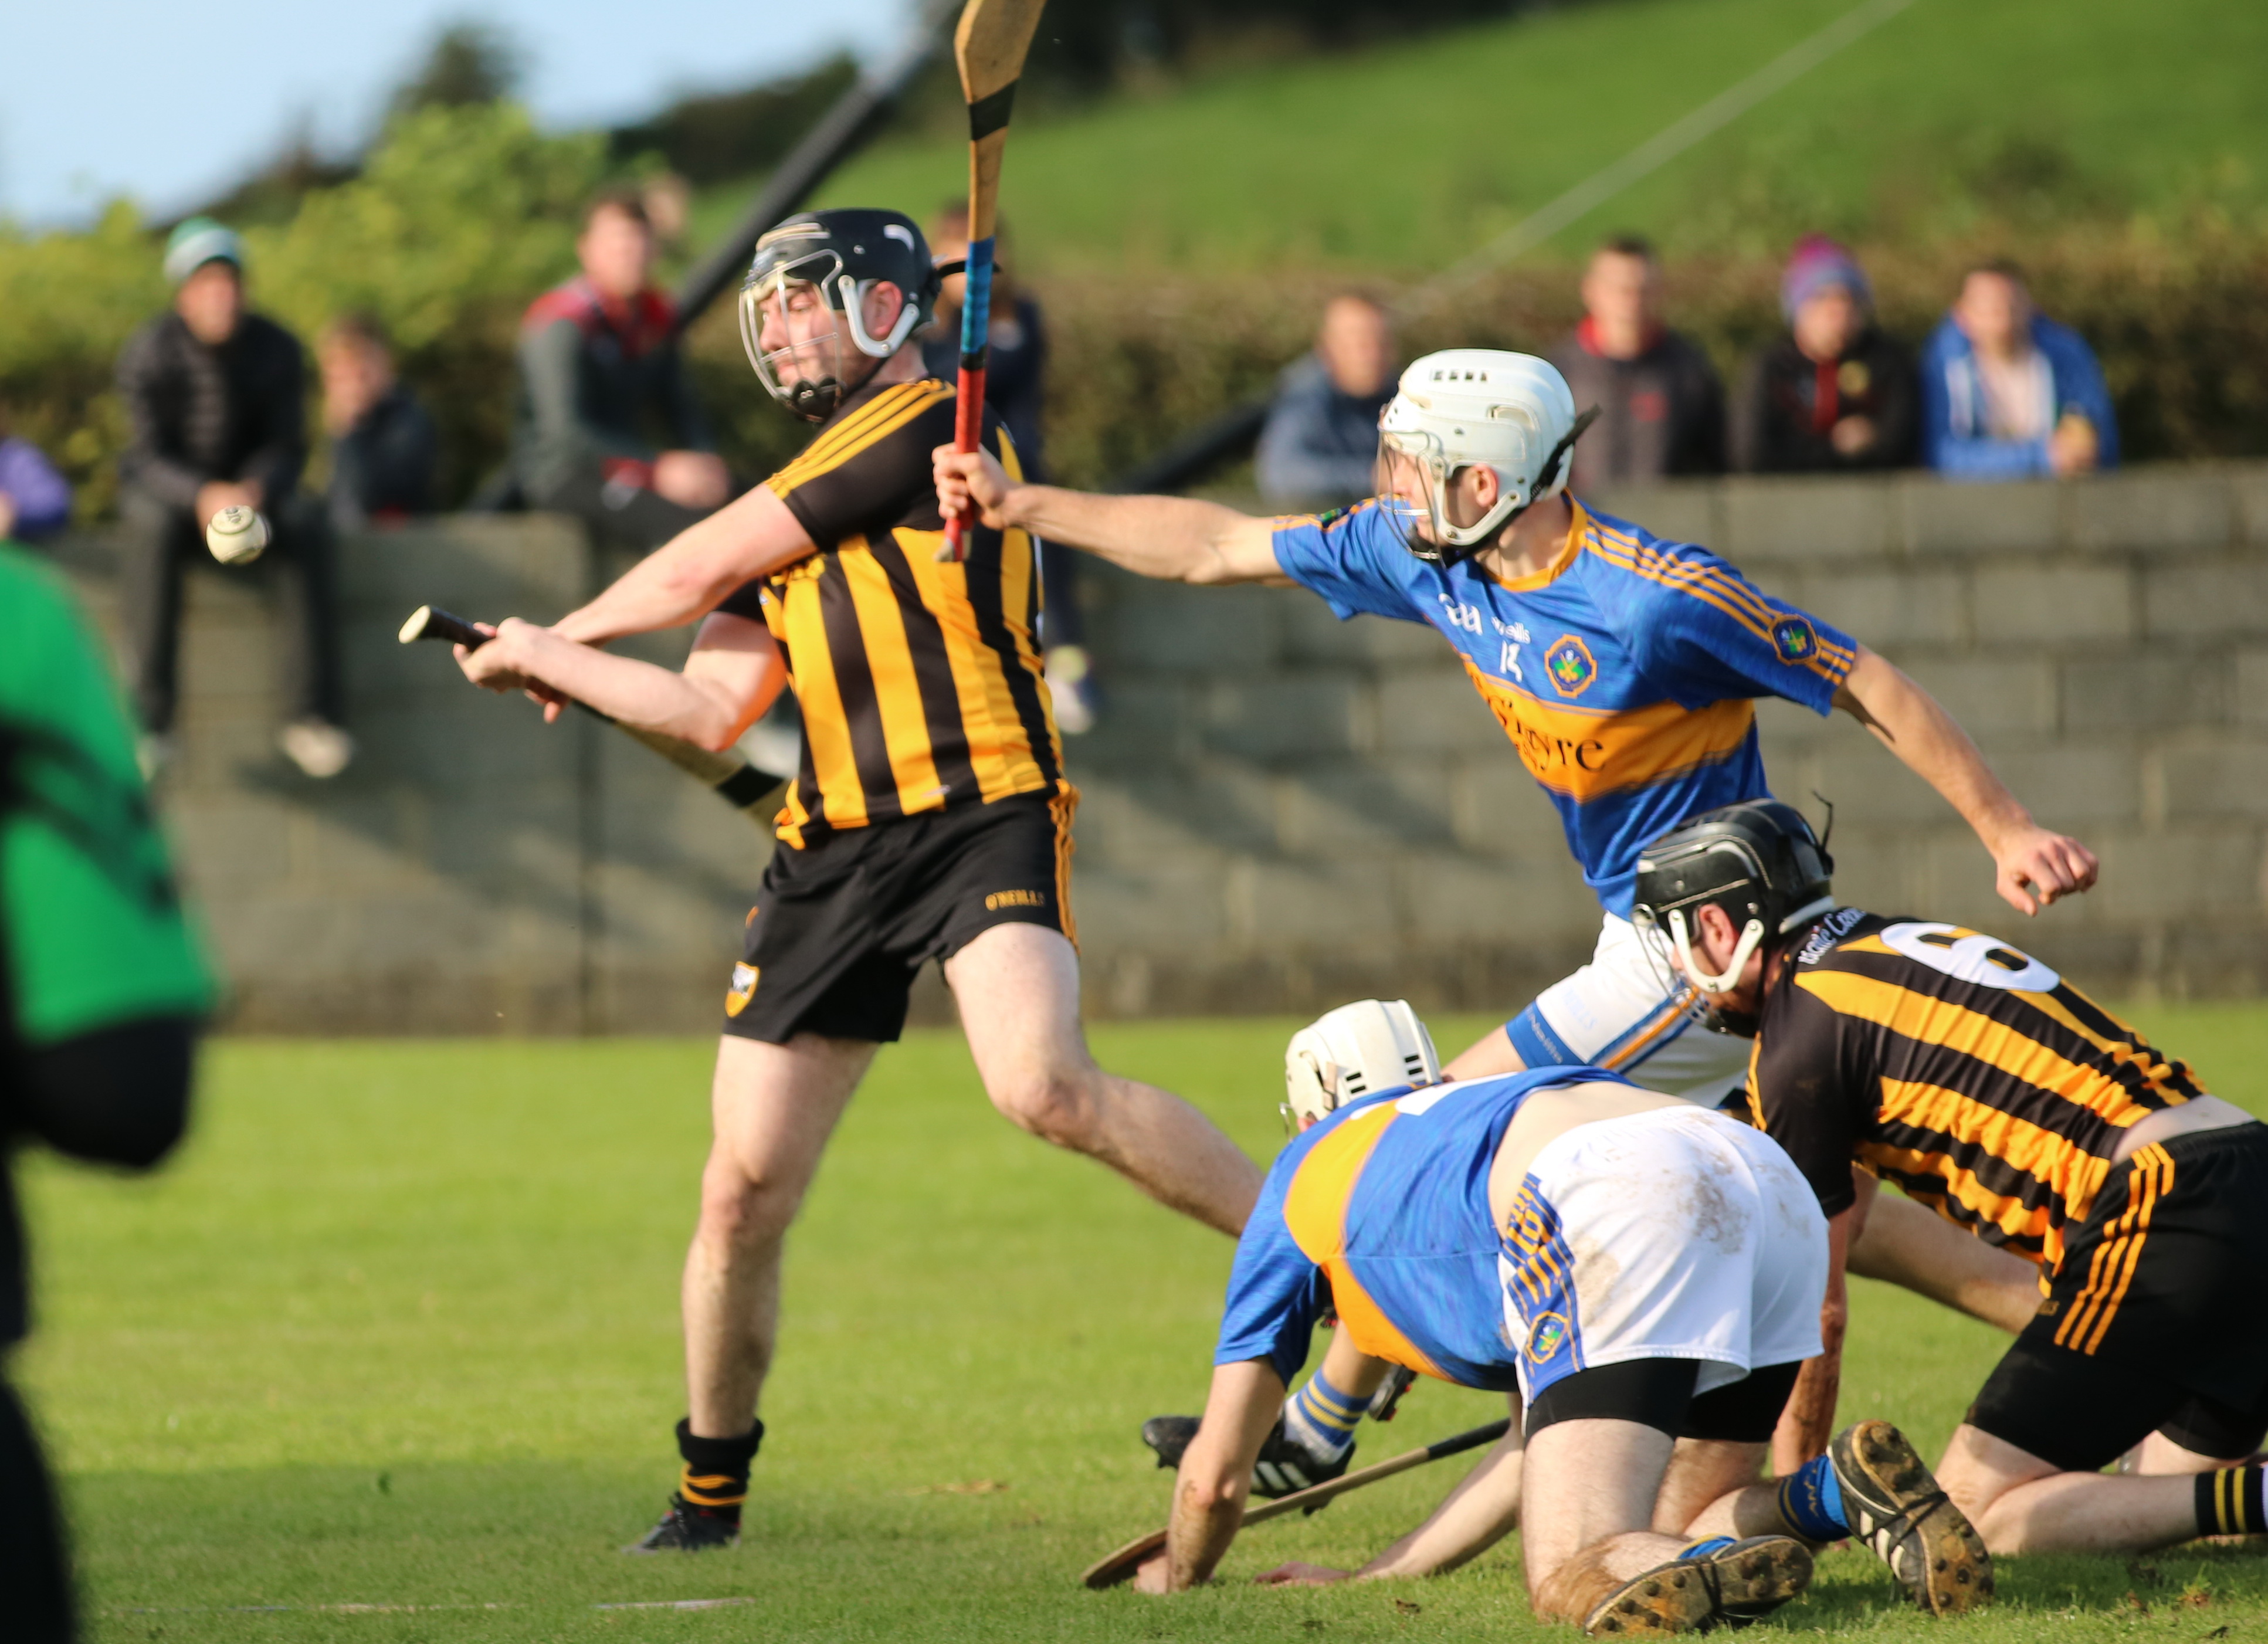 Senior Men’s Team Win the Down GAA SHC to Make it Two in a Row